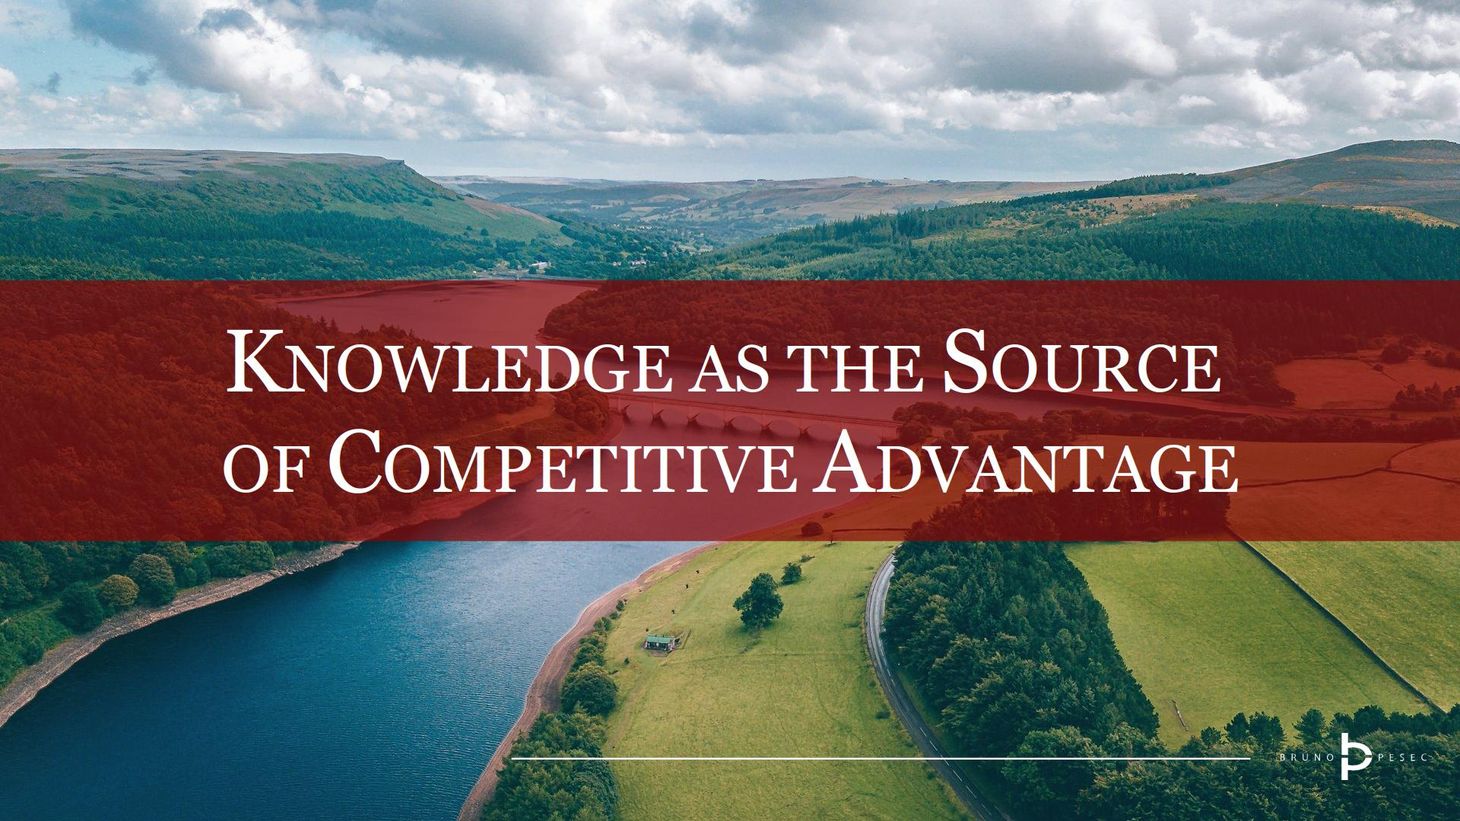 Knowledge as the source of competitive advantage